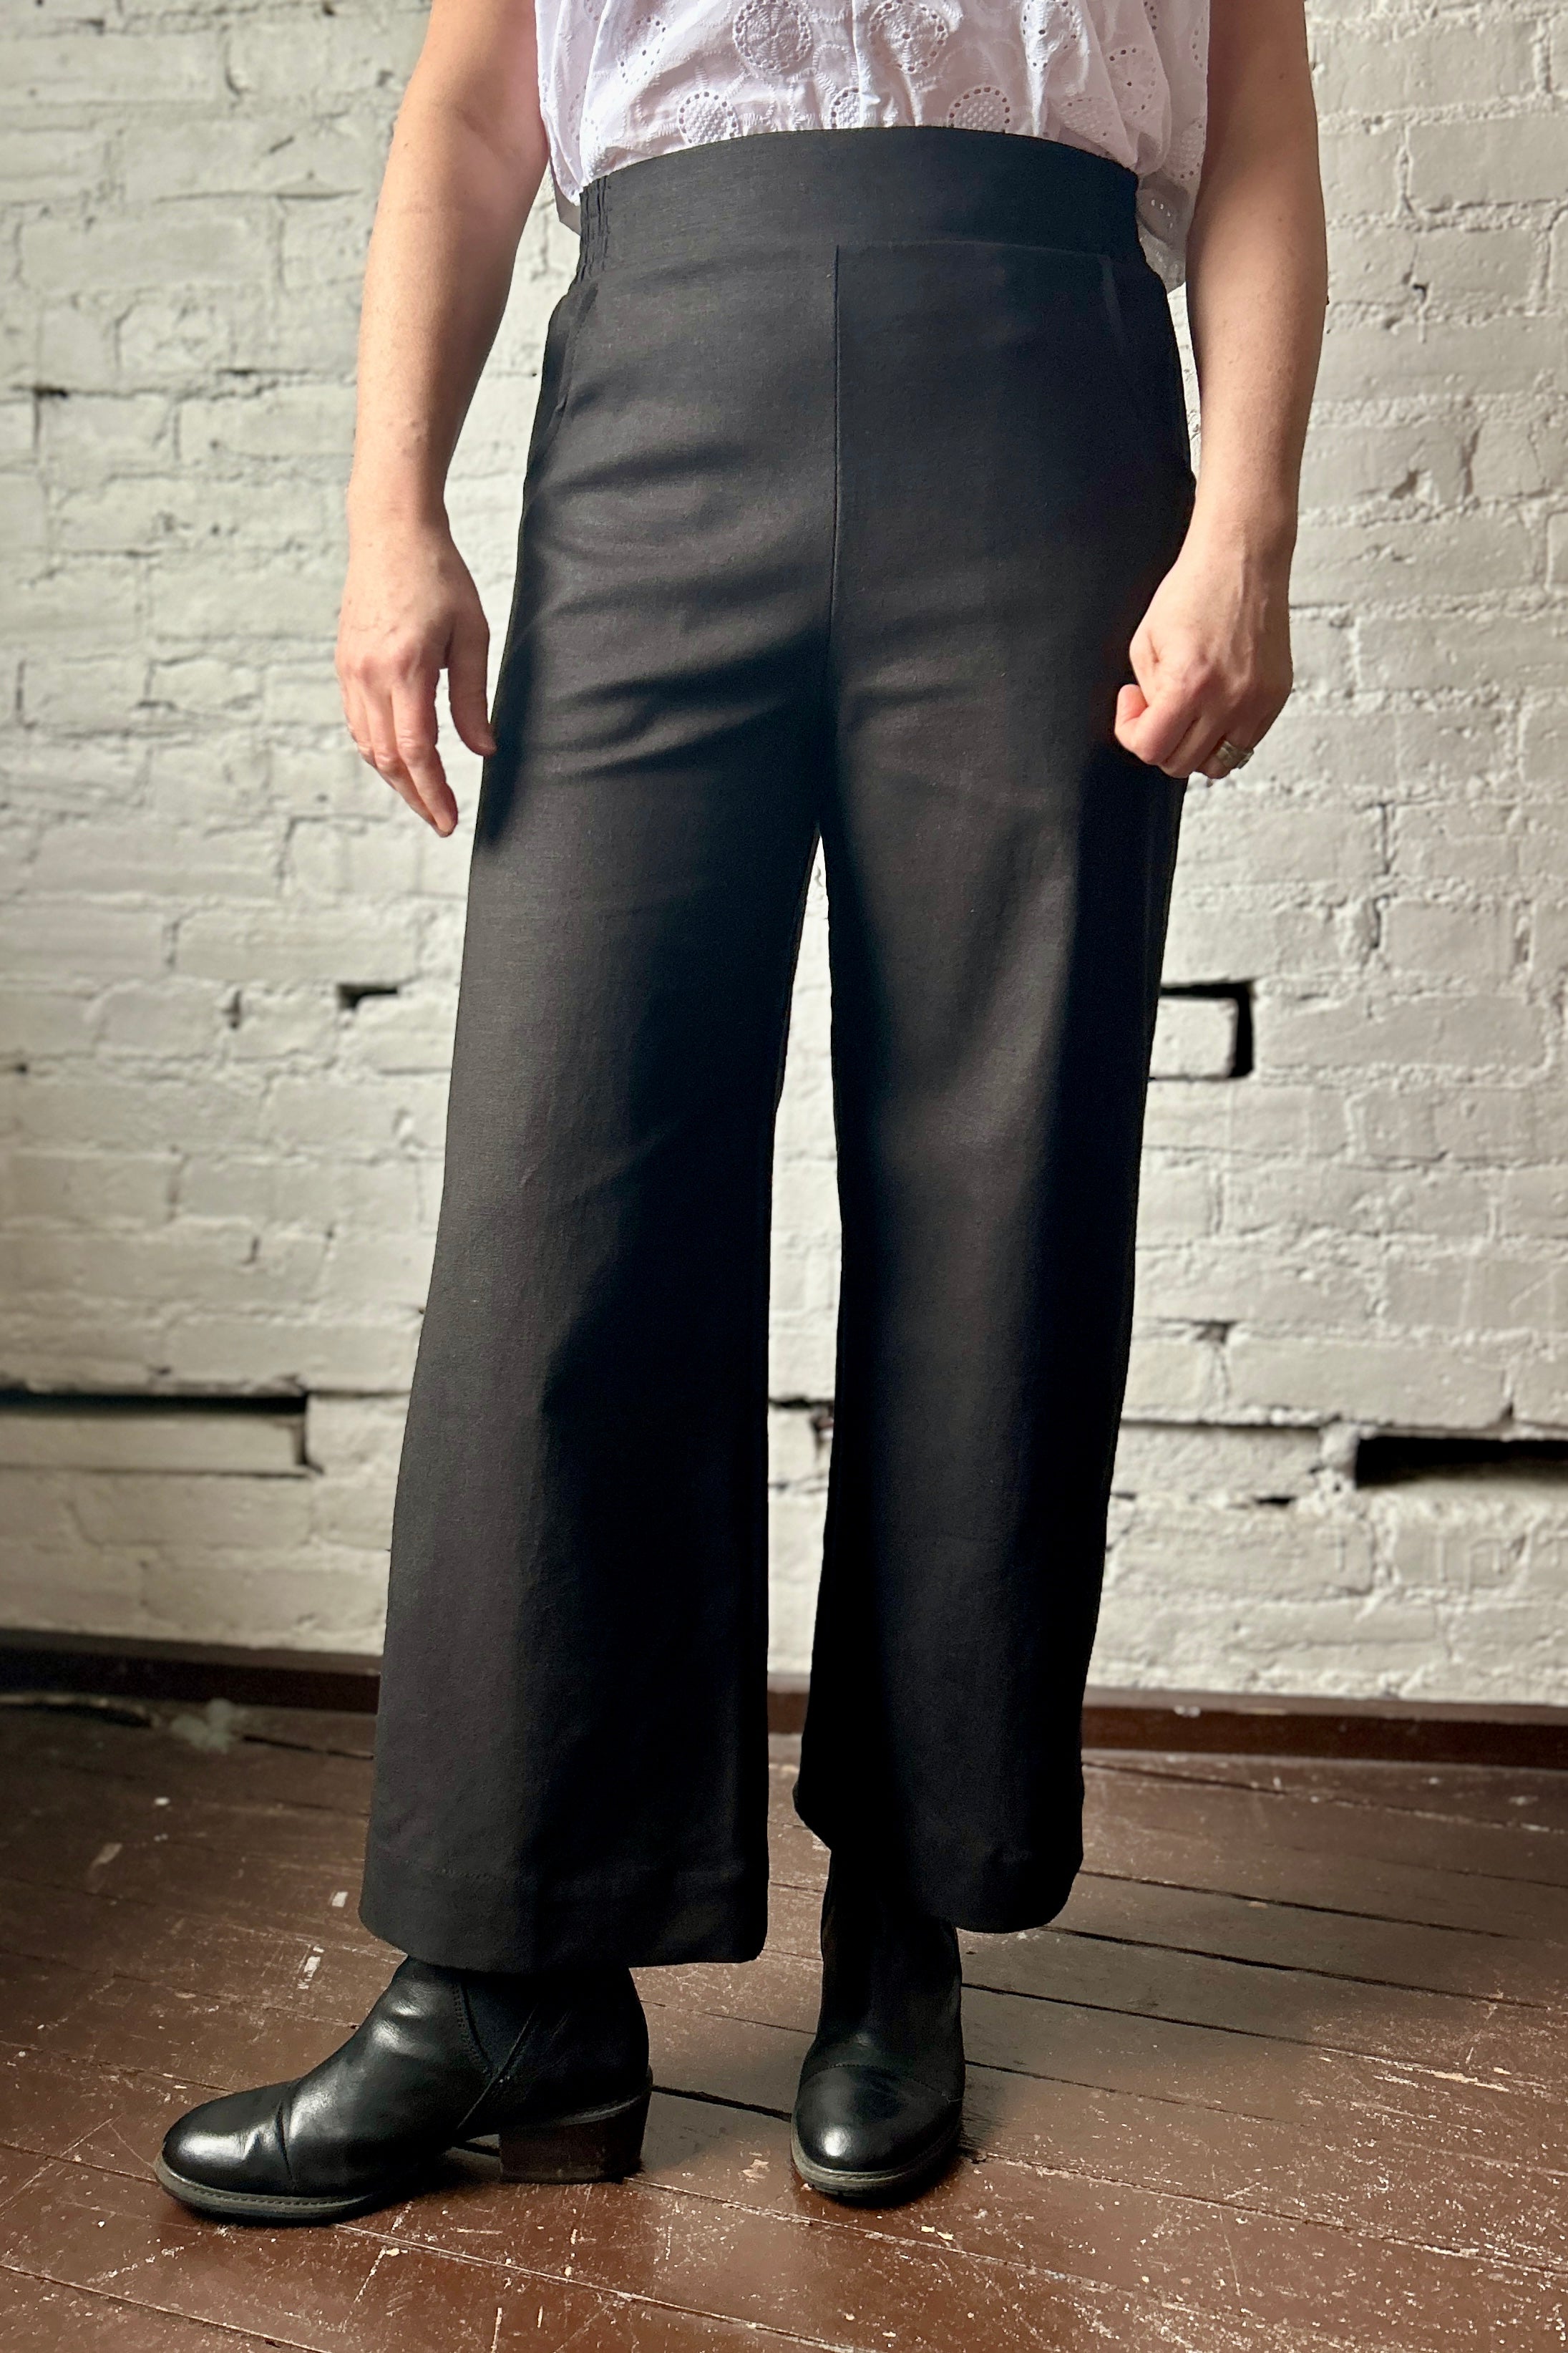 Person models black trousers with a flat front, cropped wide leg, side pockets, and elastic waistband. They wear black boots and a white blouse tucked into the waistband.